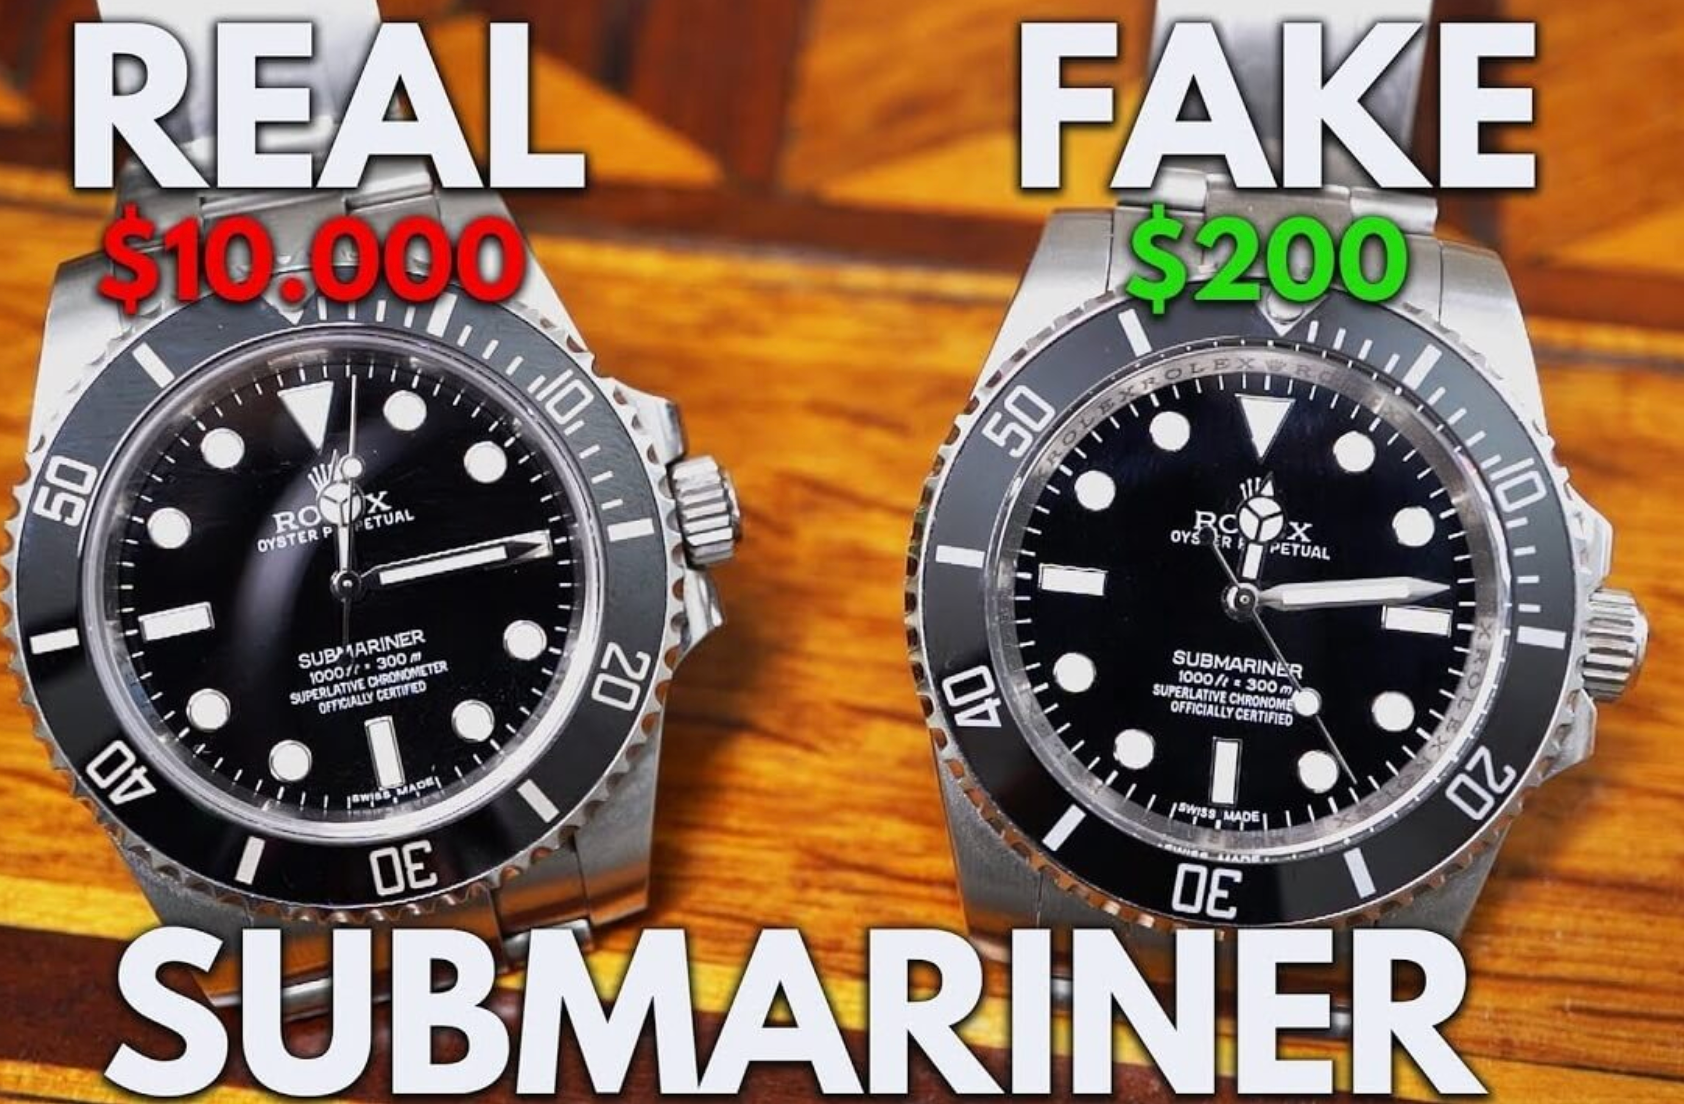 Why do People Buy Replica Watches?